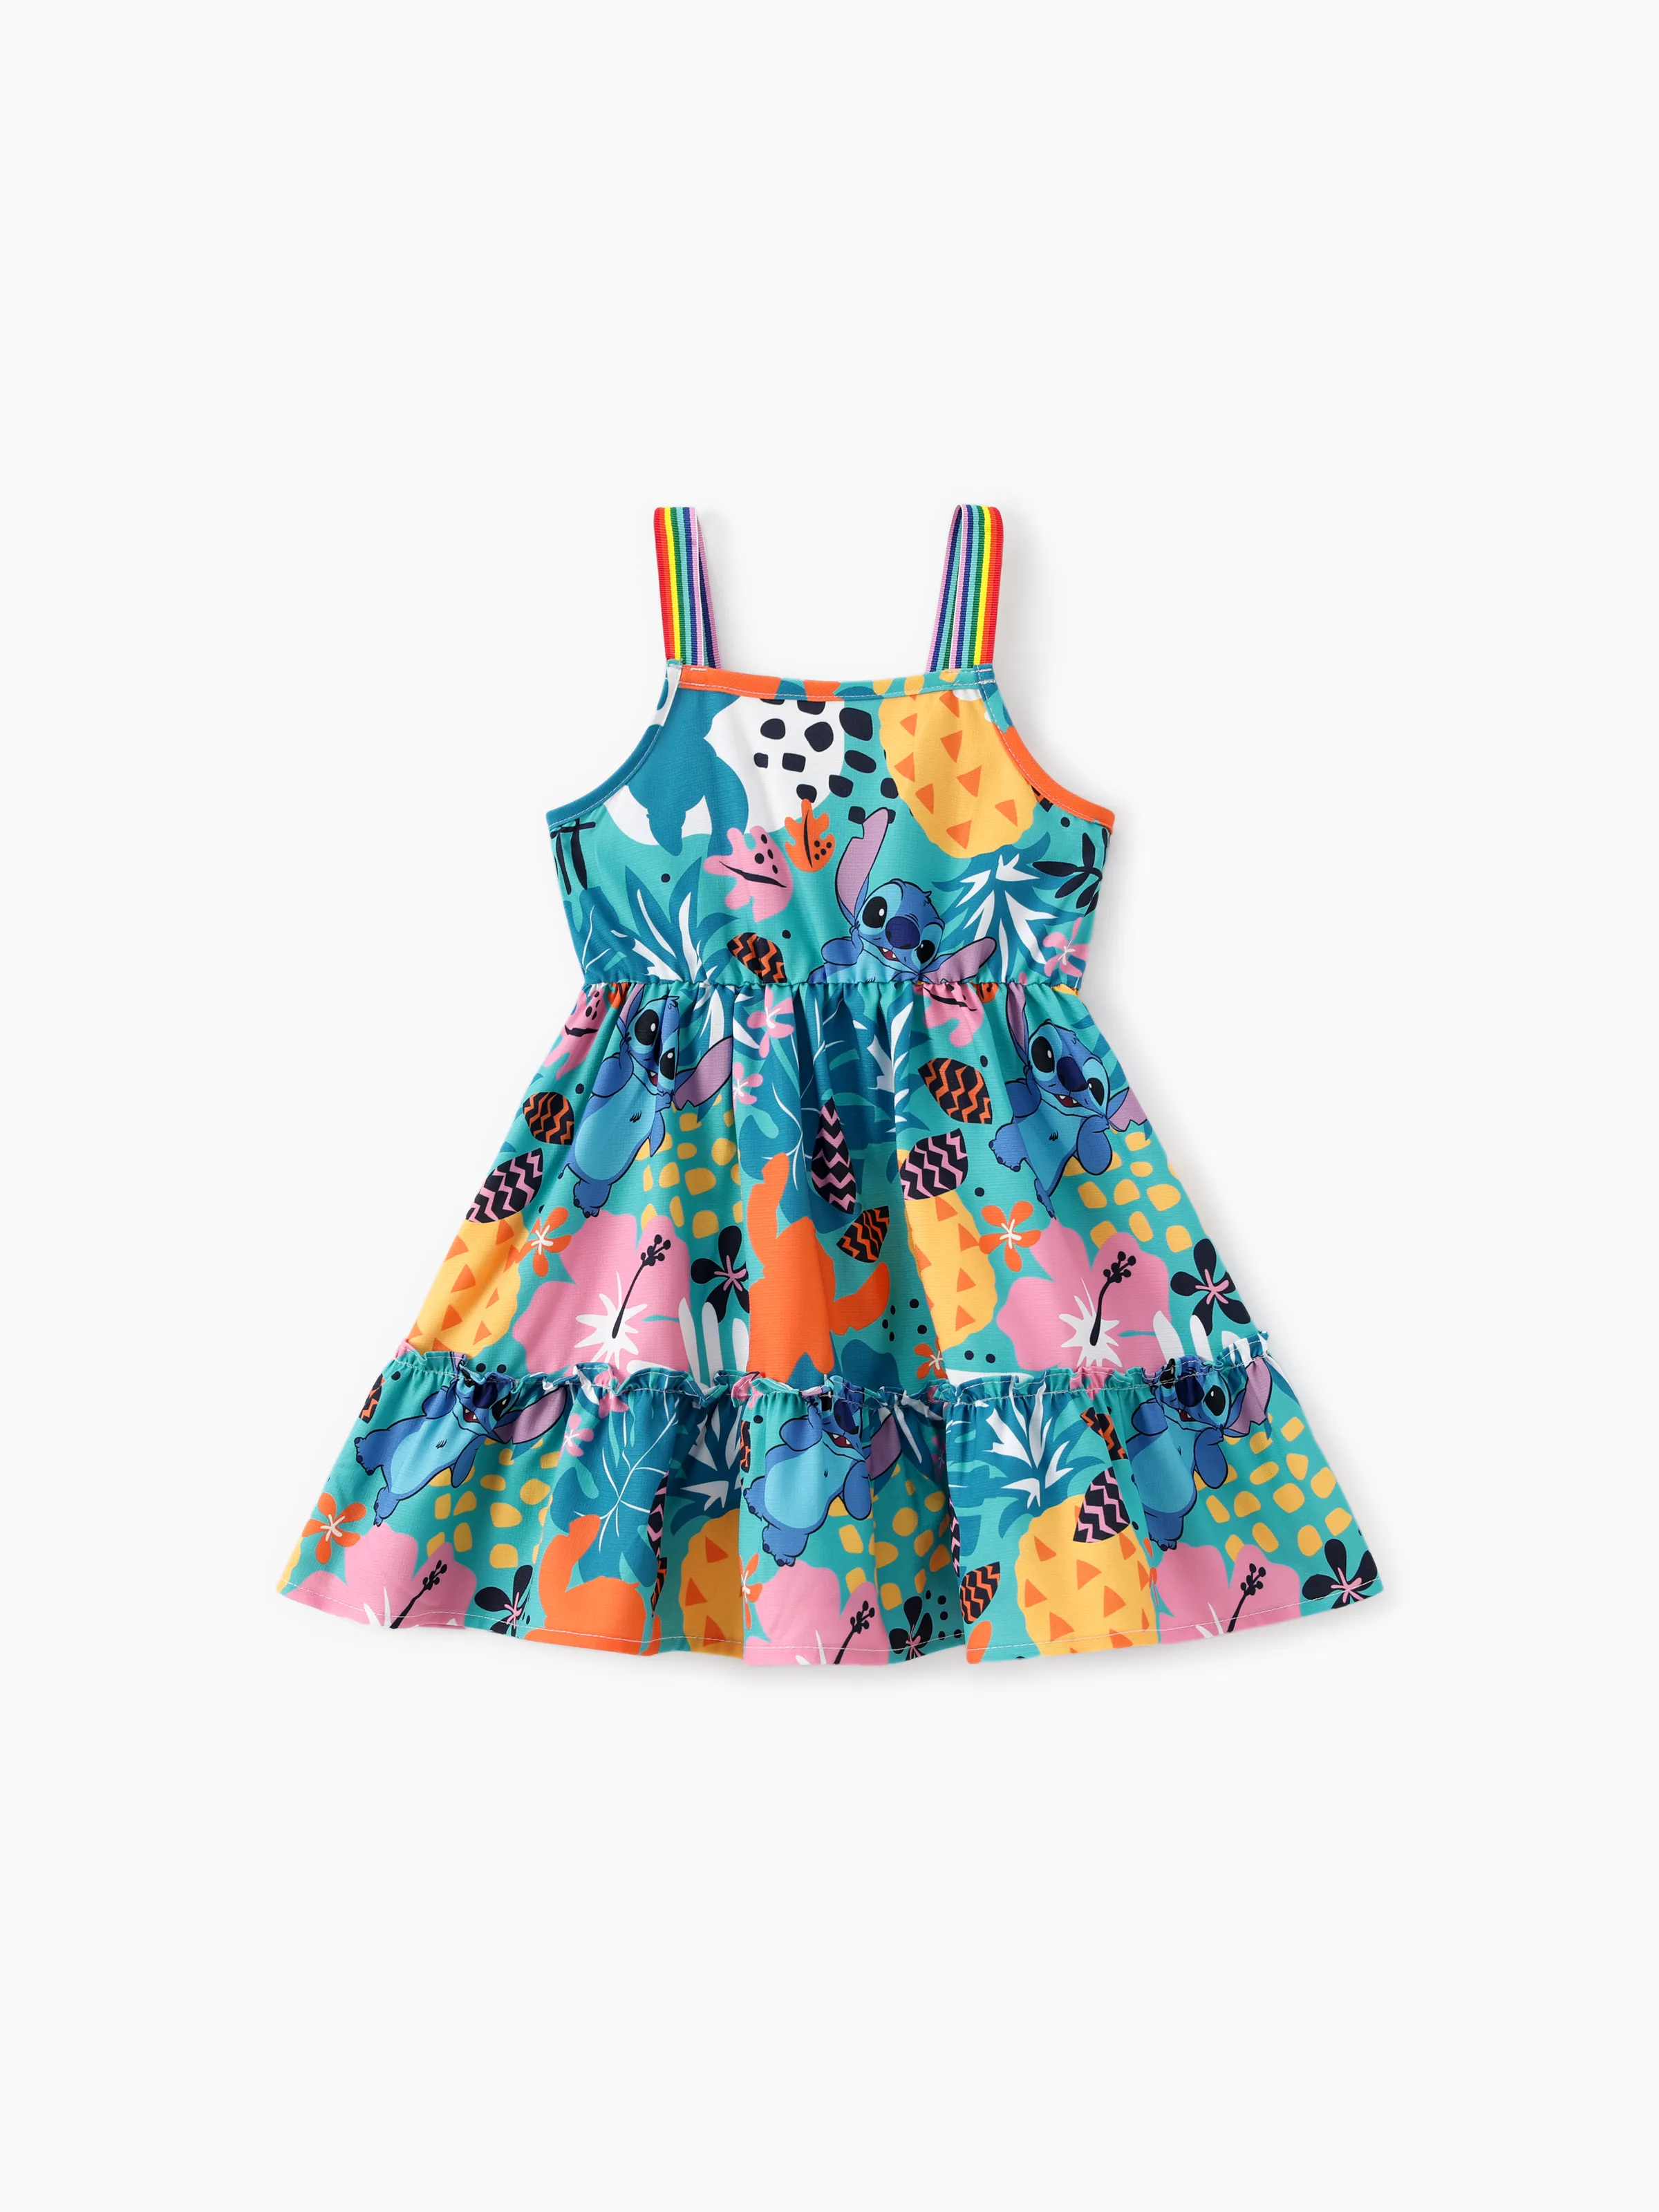 

Disney Stitch Toddler Girls 1pc Plant Characters Print with Tropical Rainforest Vibe Sleeveless Dress